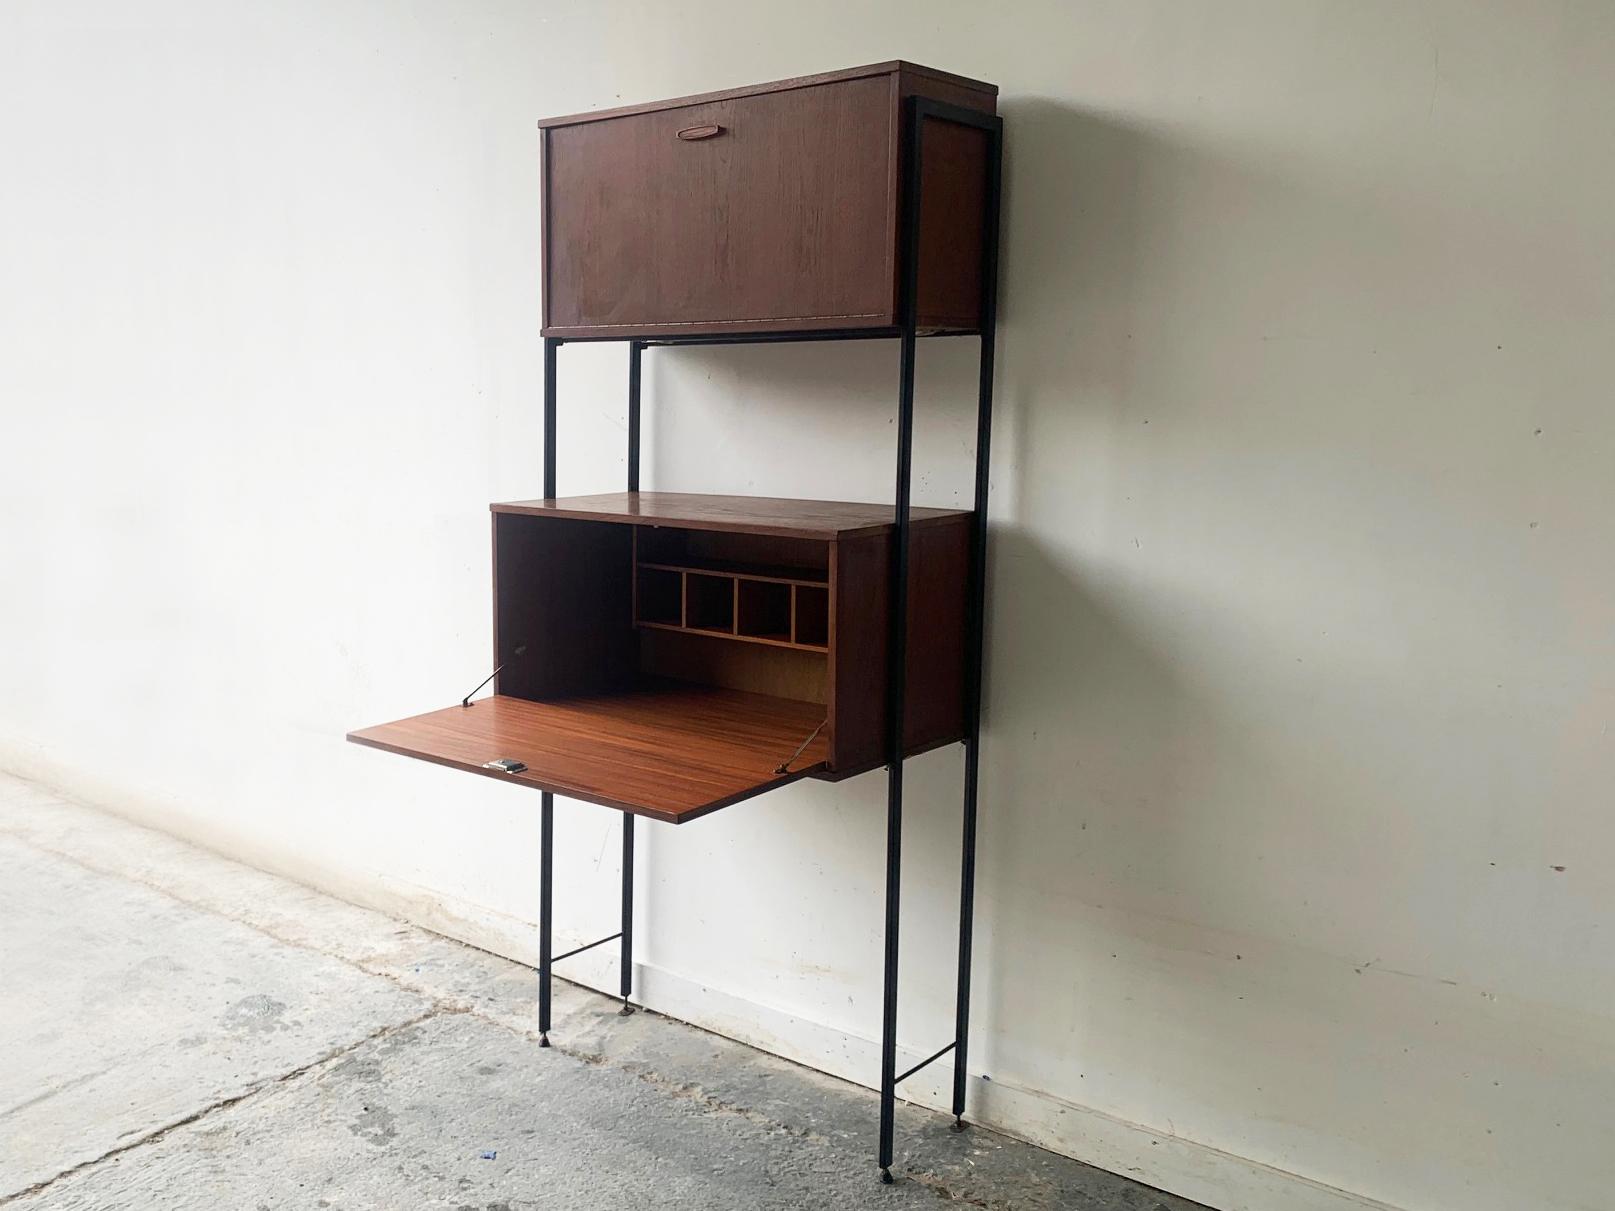 A mid century modular free standing shelving/storage unit manufactured by respected manufacturer ‘Avalon’ in the UK.

The cabinets are teak and and teak veneer with their original metal cross supports and black metal uprights. The two units  can be